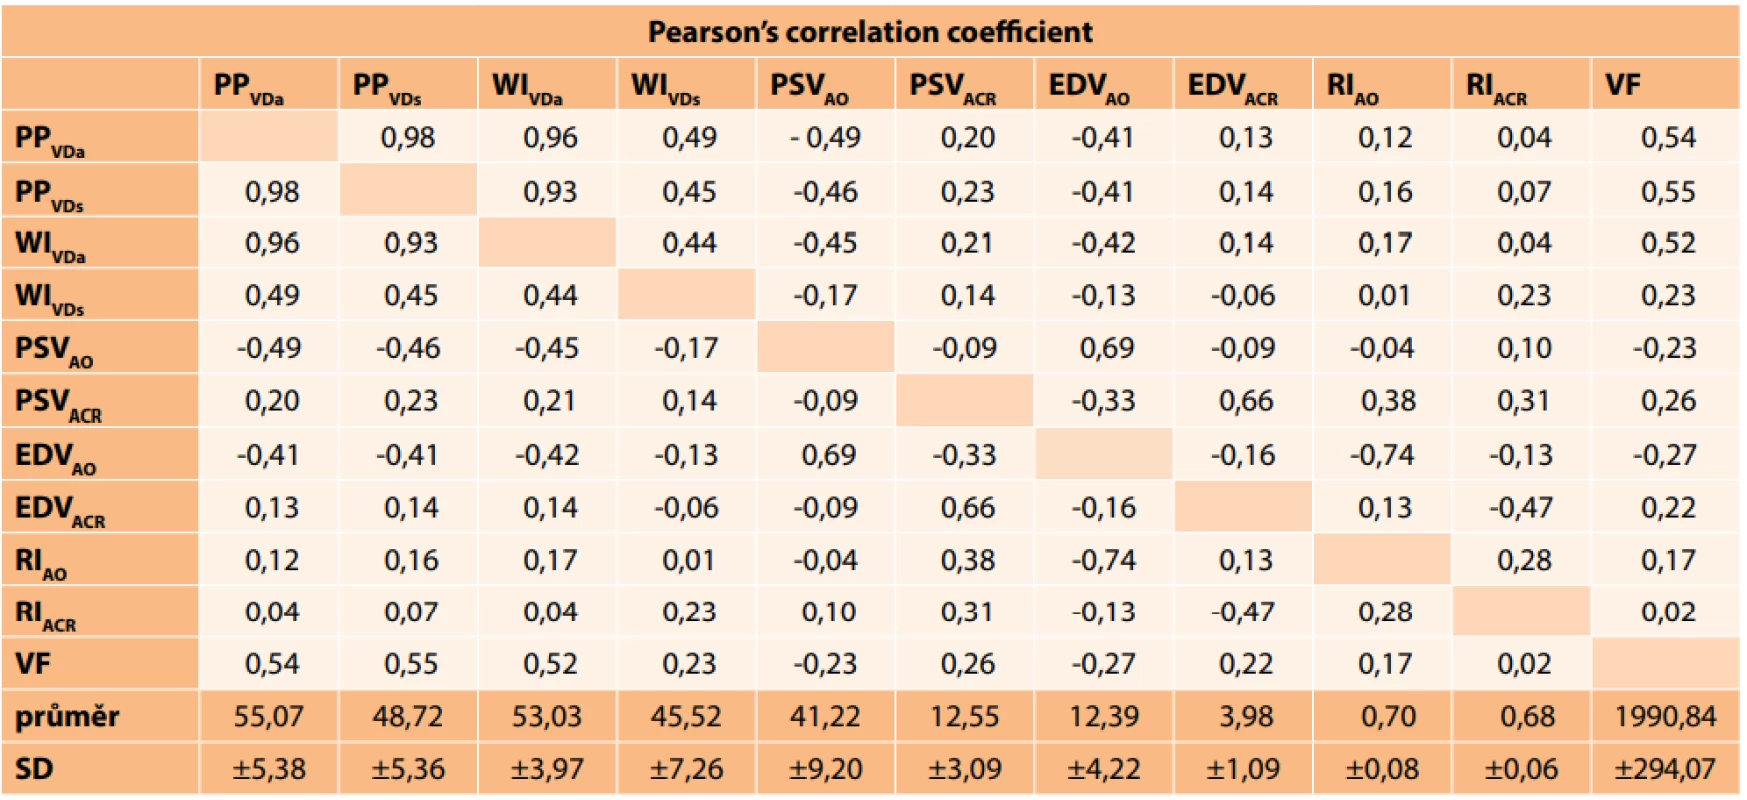 Resulting values of Pearson’s correlation coefficient. Very weak correlation (r = 0.00–0.19), weak correlation (r = 0.20–0.39), medium correlation (r = 0.40–0.59), strong correlation (r = 0.60–0.79), very strong correlation (r = 0.80–1.00). The mean measured values
and their standard deviation are presented in the last two rows of the table.